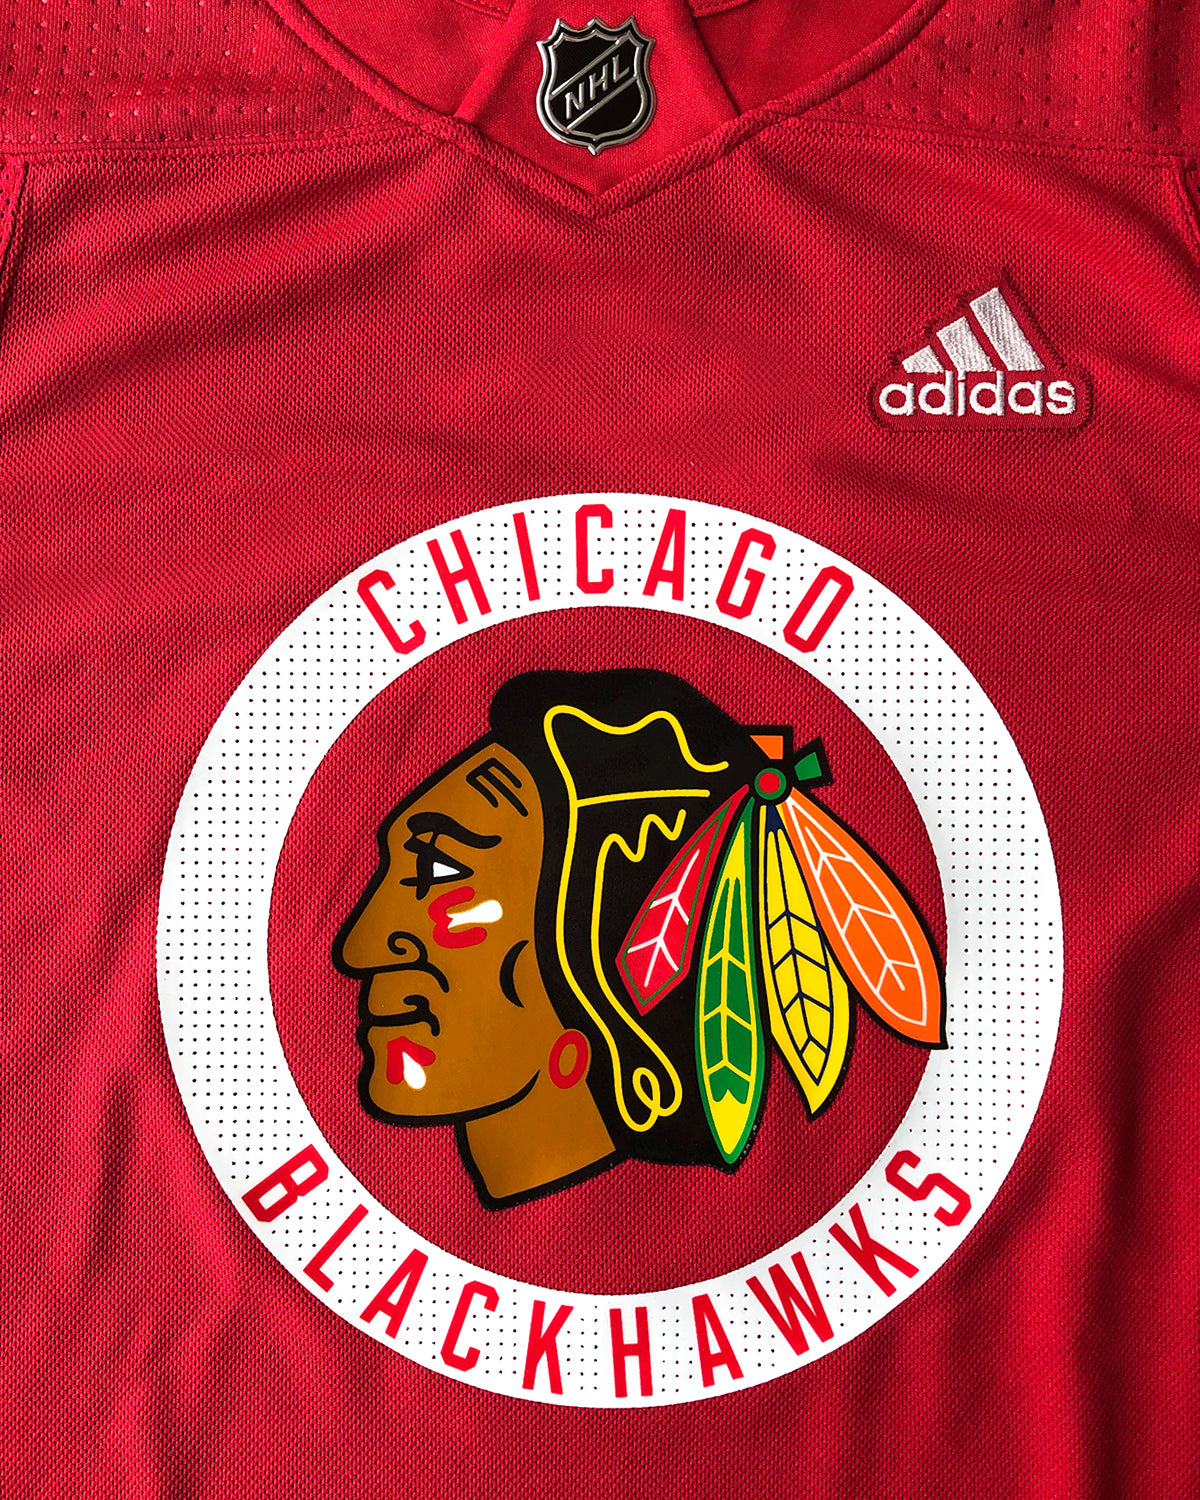 Chicago Blackhawks won't wear Pride-themed warmup jerseys, citing safety  concerns for Russian players - The Globe and Mail